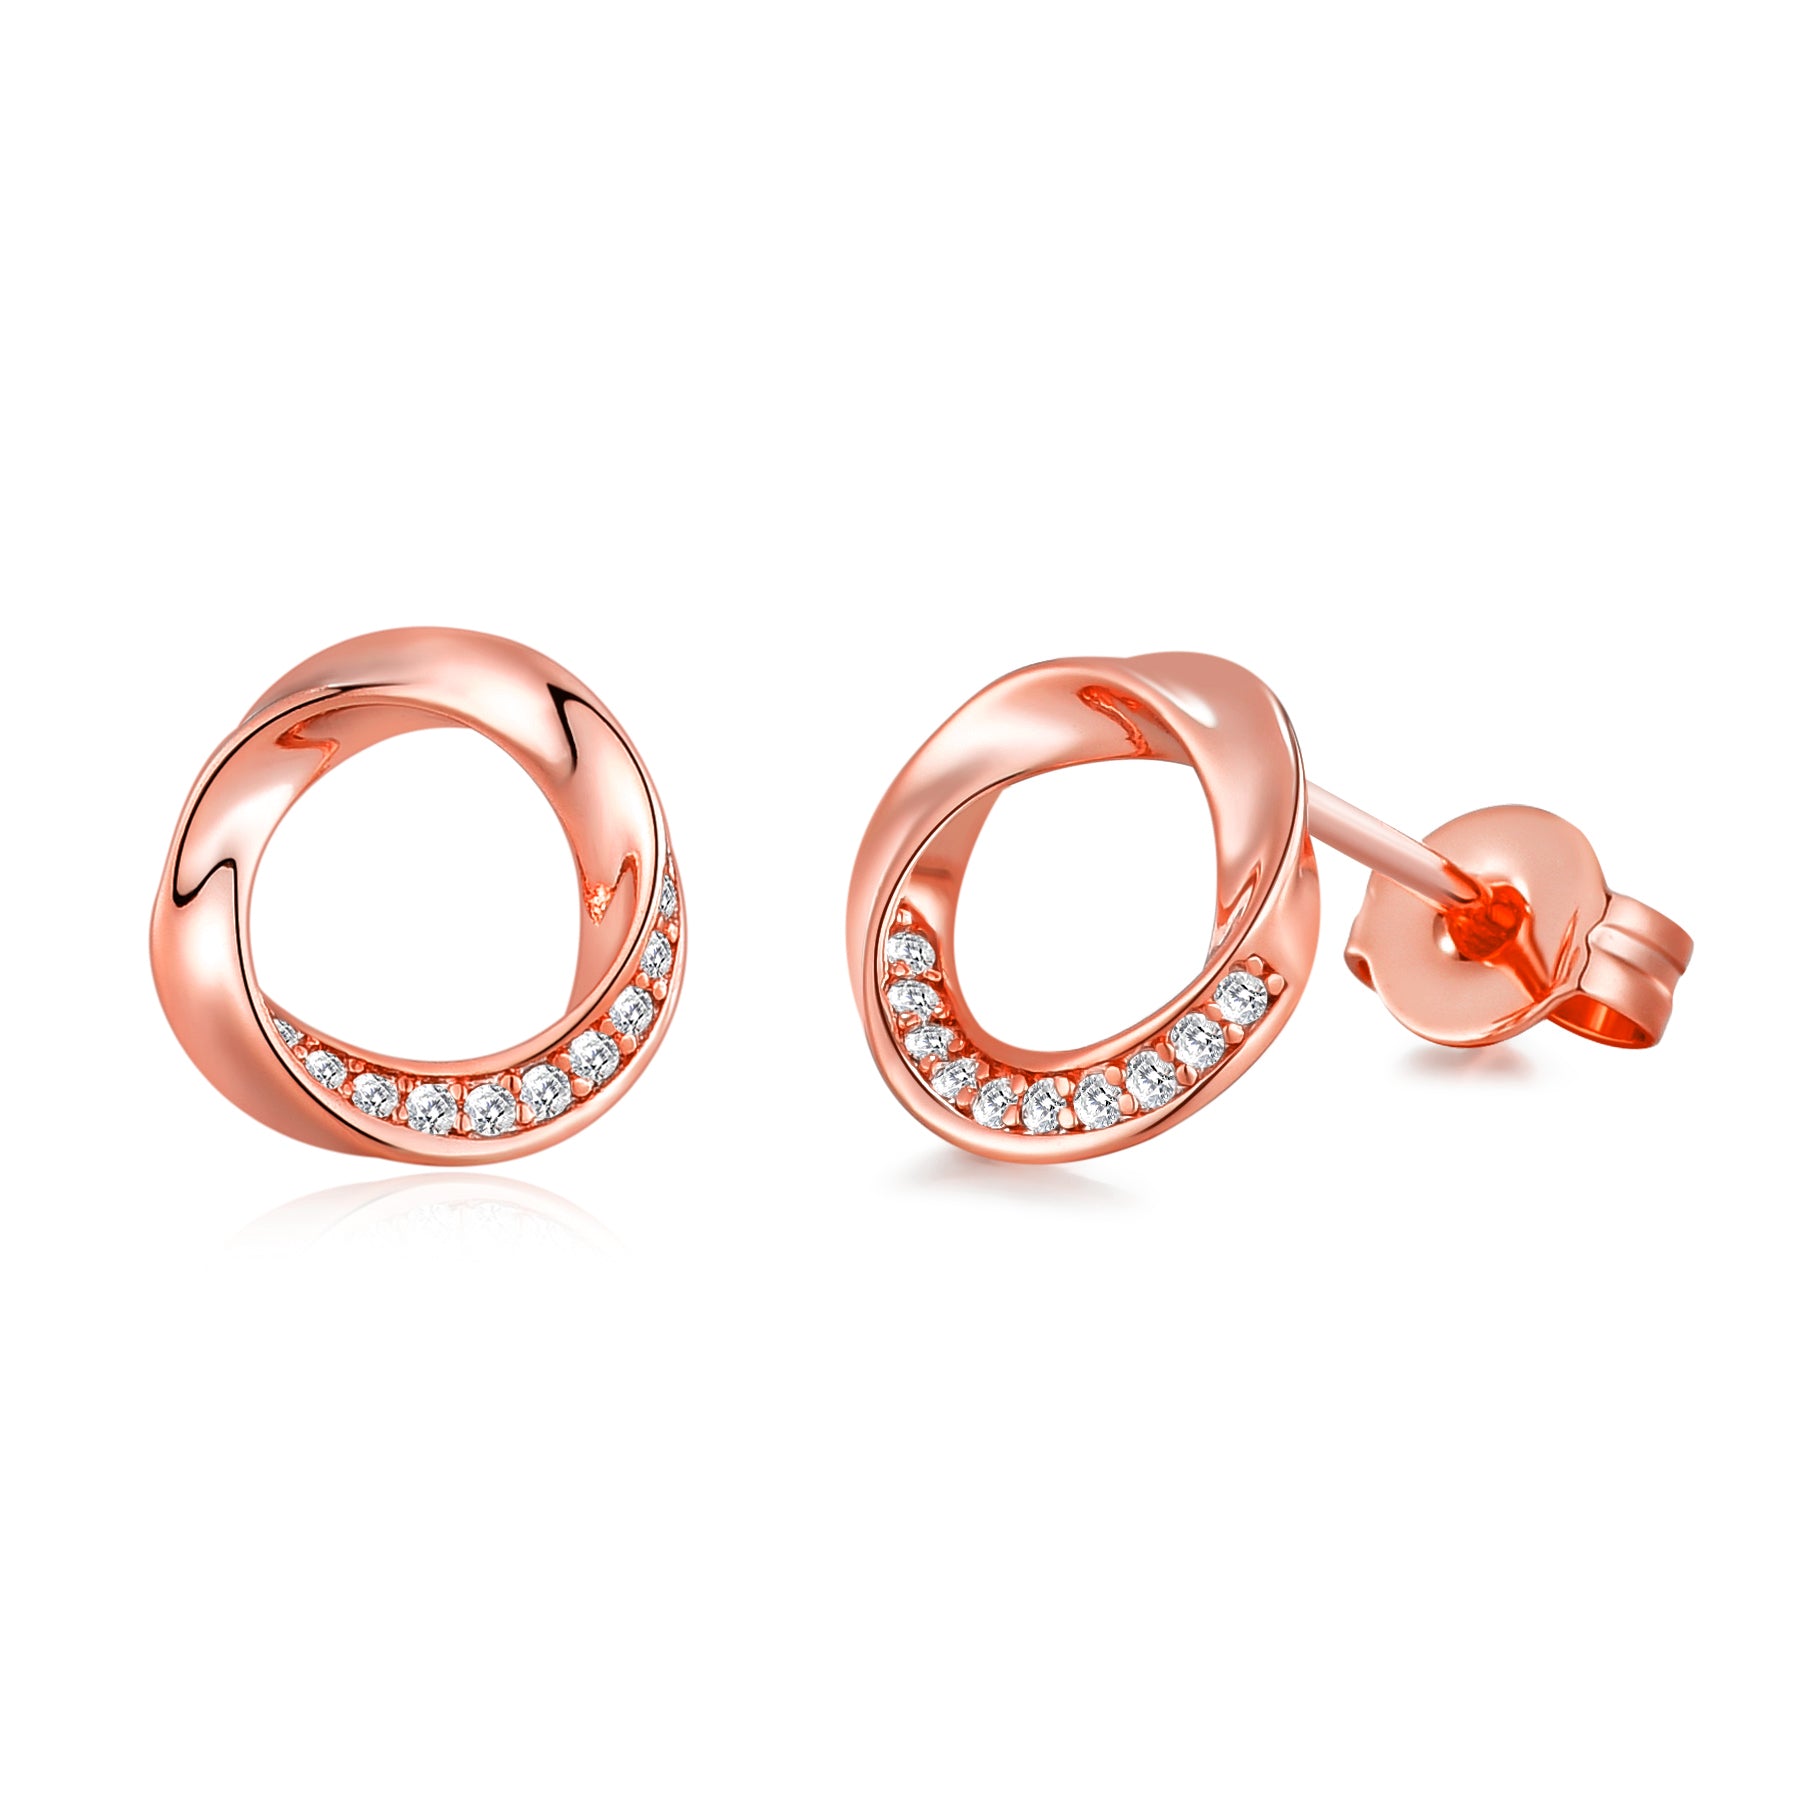 Rose Gold Plated Circle Twist Earrings Created with Zircondia® Crystals by Philip Jones Jewellery